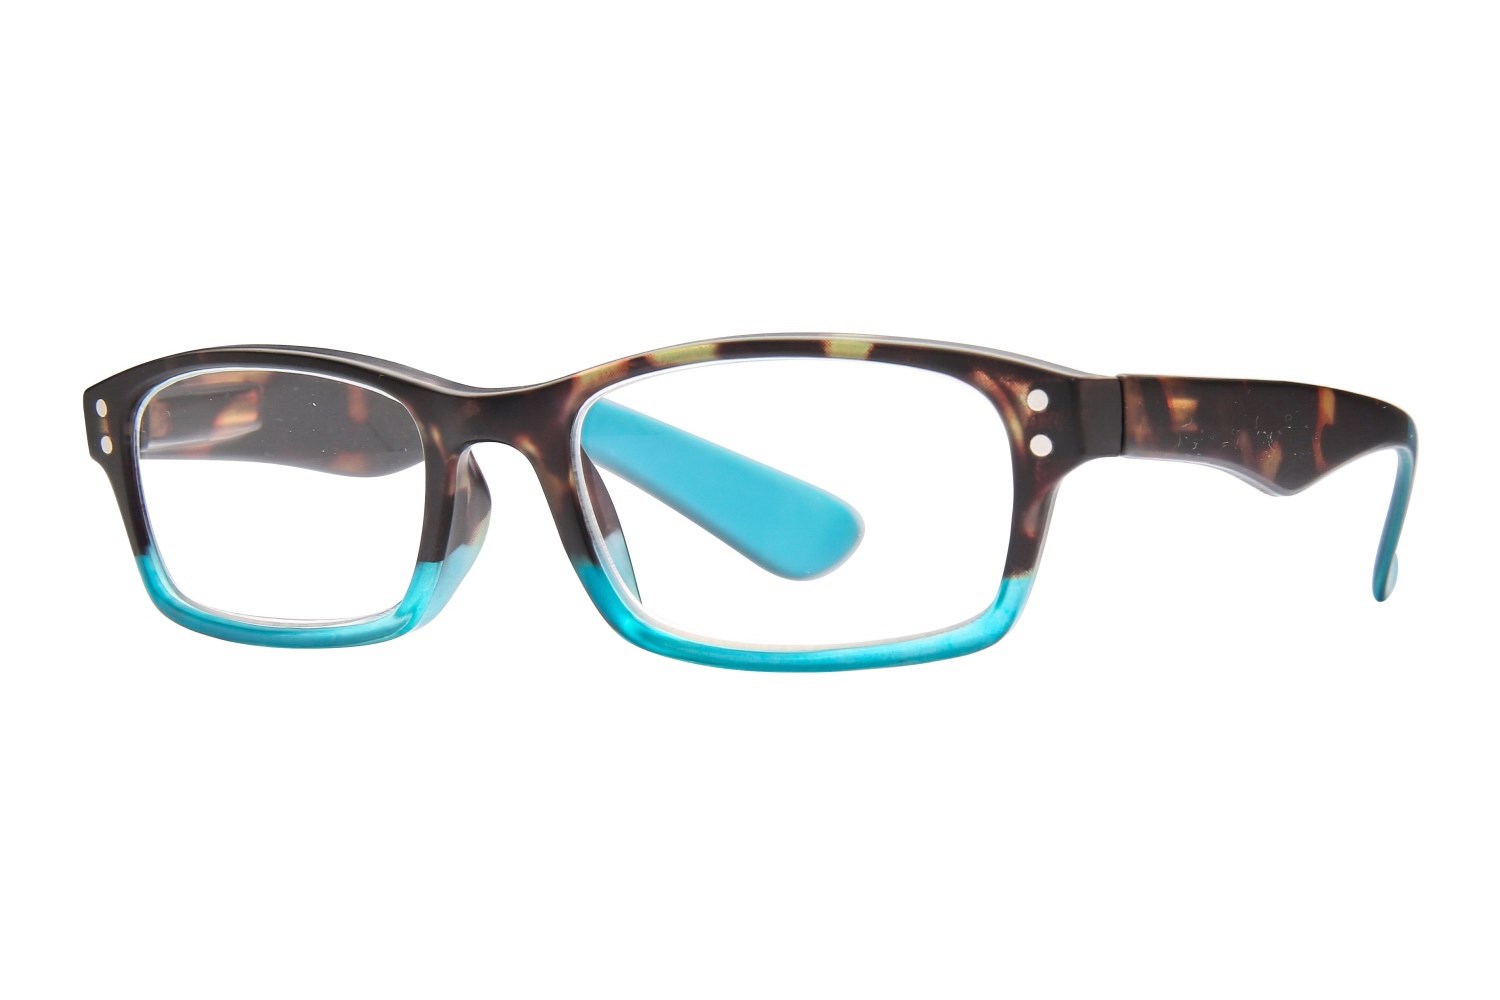 Peepers Second to None Reading Glasses [Turquoise +1.25]